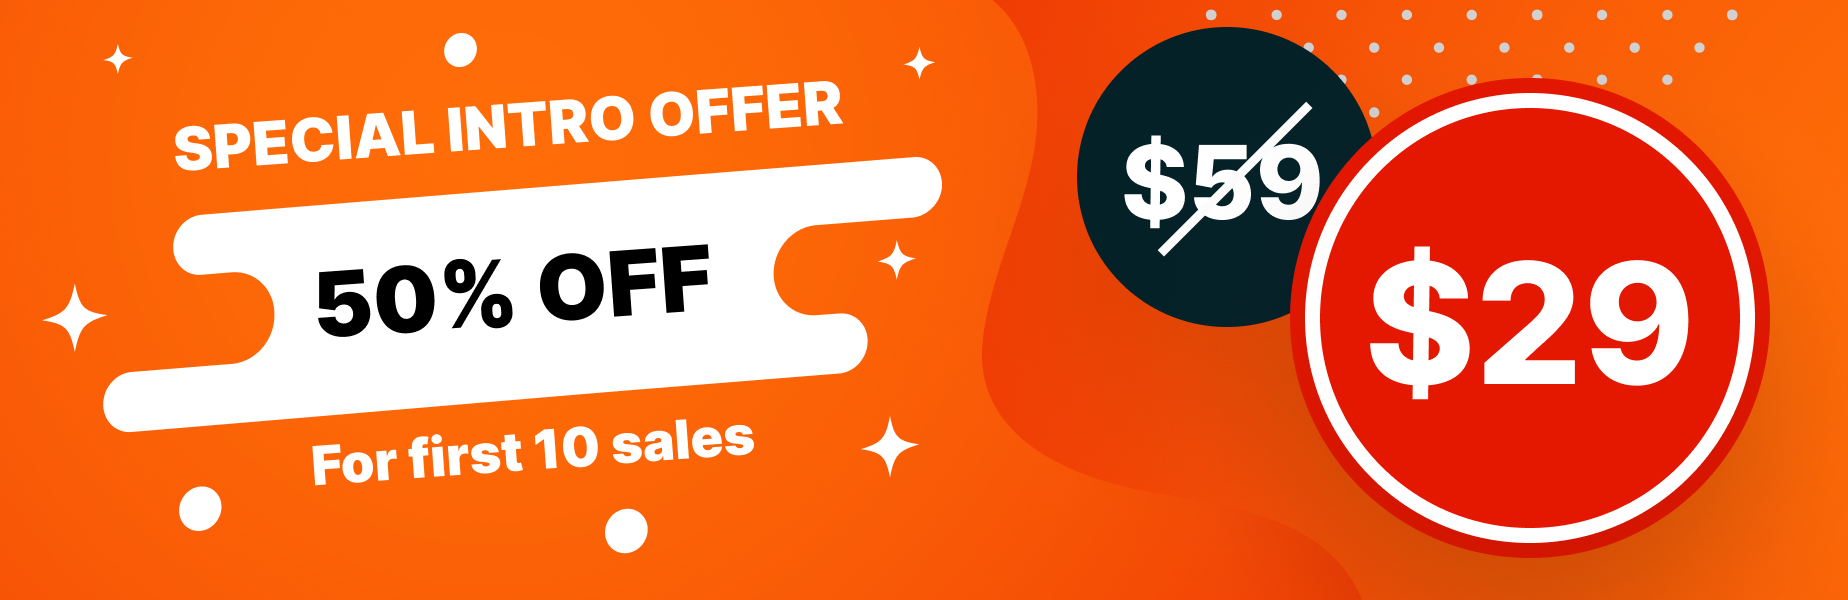 Gofo - Intro Offer!